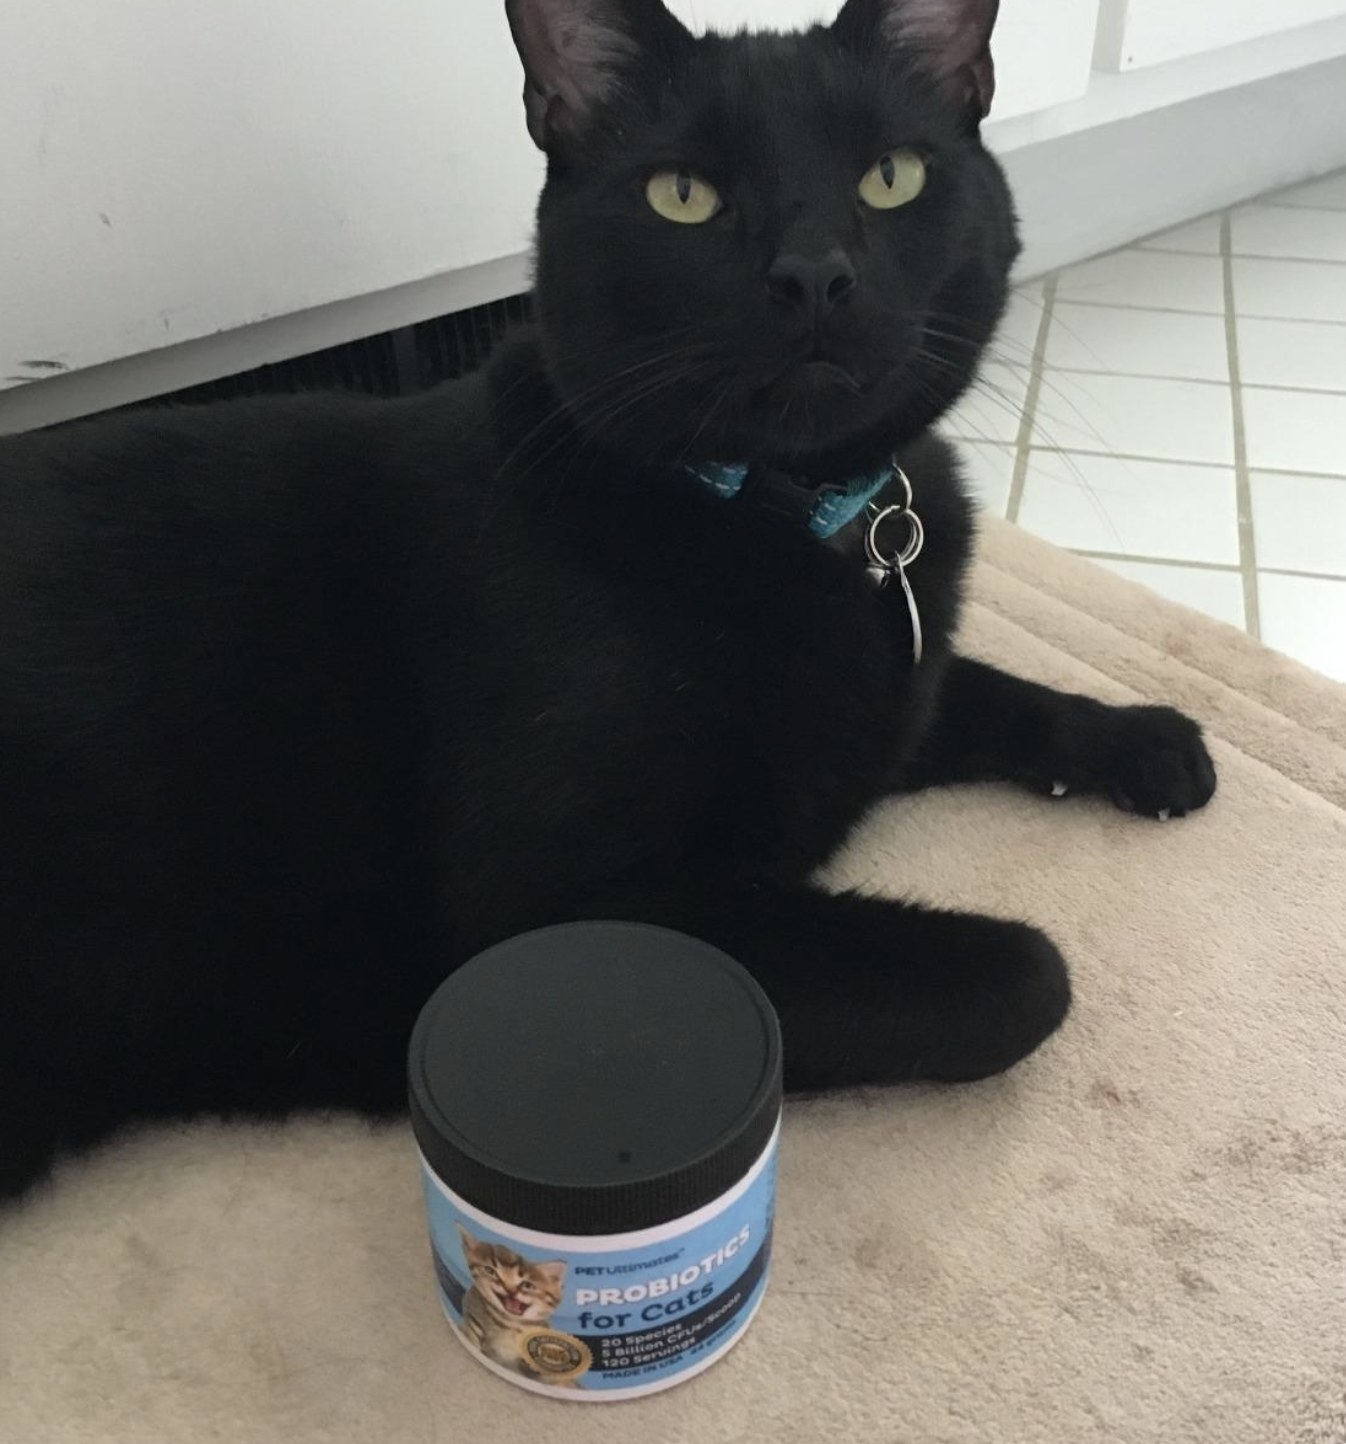 a blue and black probiotic tub in front of a black cat